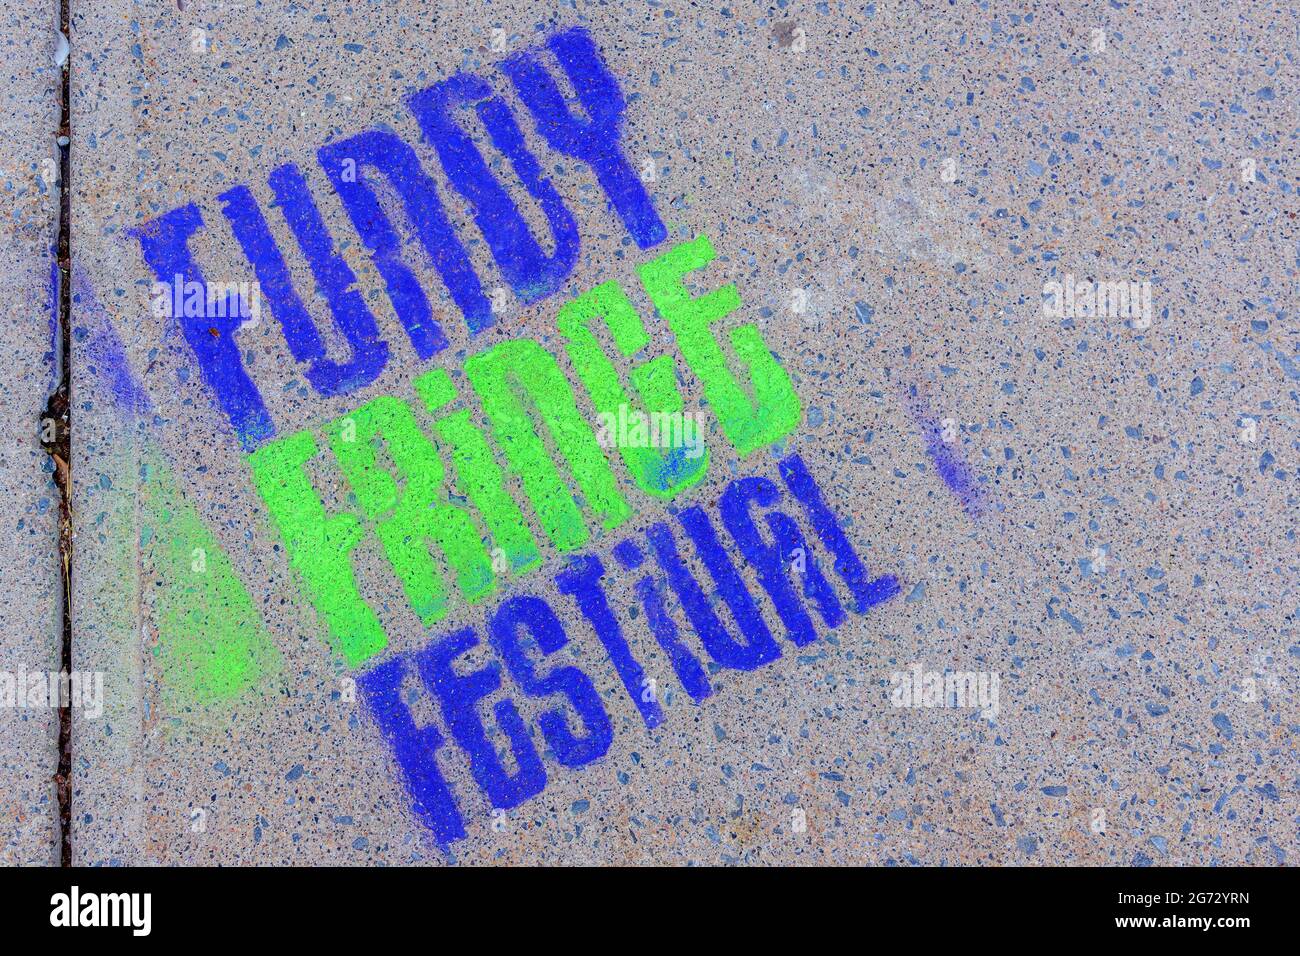 Saint John, NB, Canada - August 14, 2017: A Fundy Fringe Festival logo painted in blue and green on a concrete sidewalk. Stock Photo